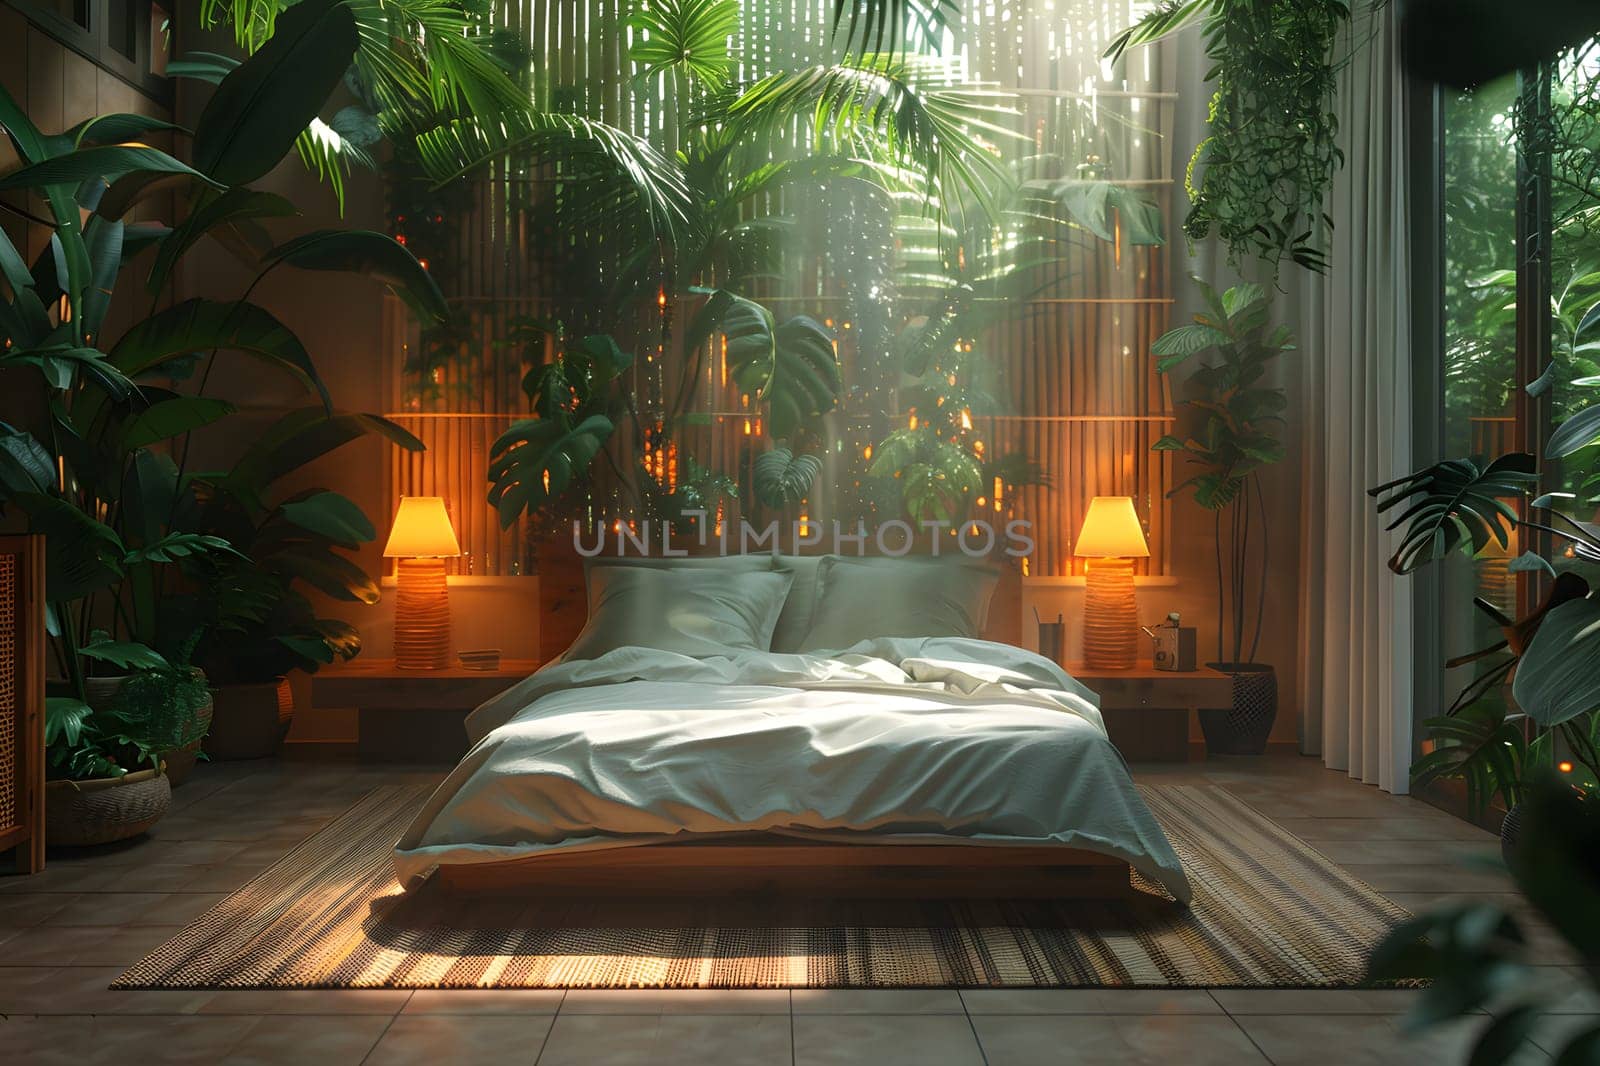 A room with a plethora of terrestrial plants creating a lush indoor landscape, complemented by a cozy wooden bed for a peaceful and natural interior design